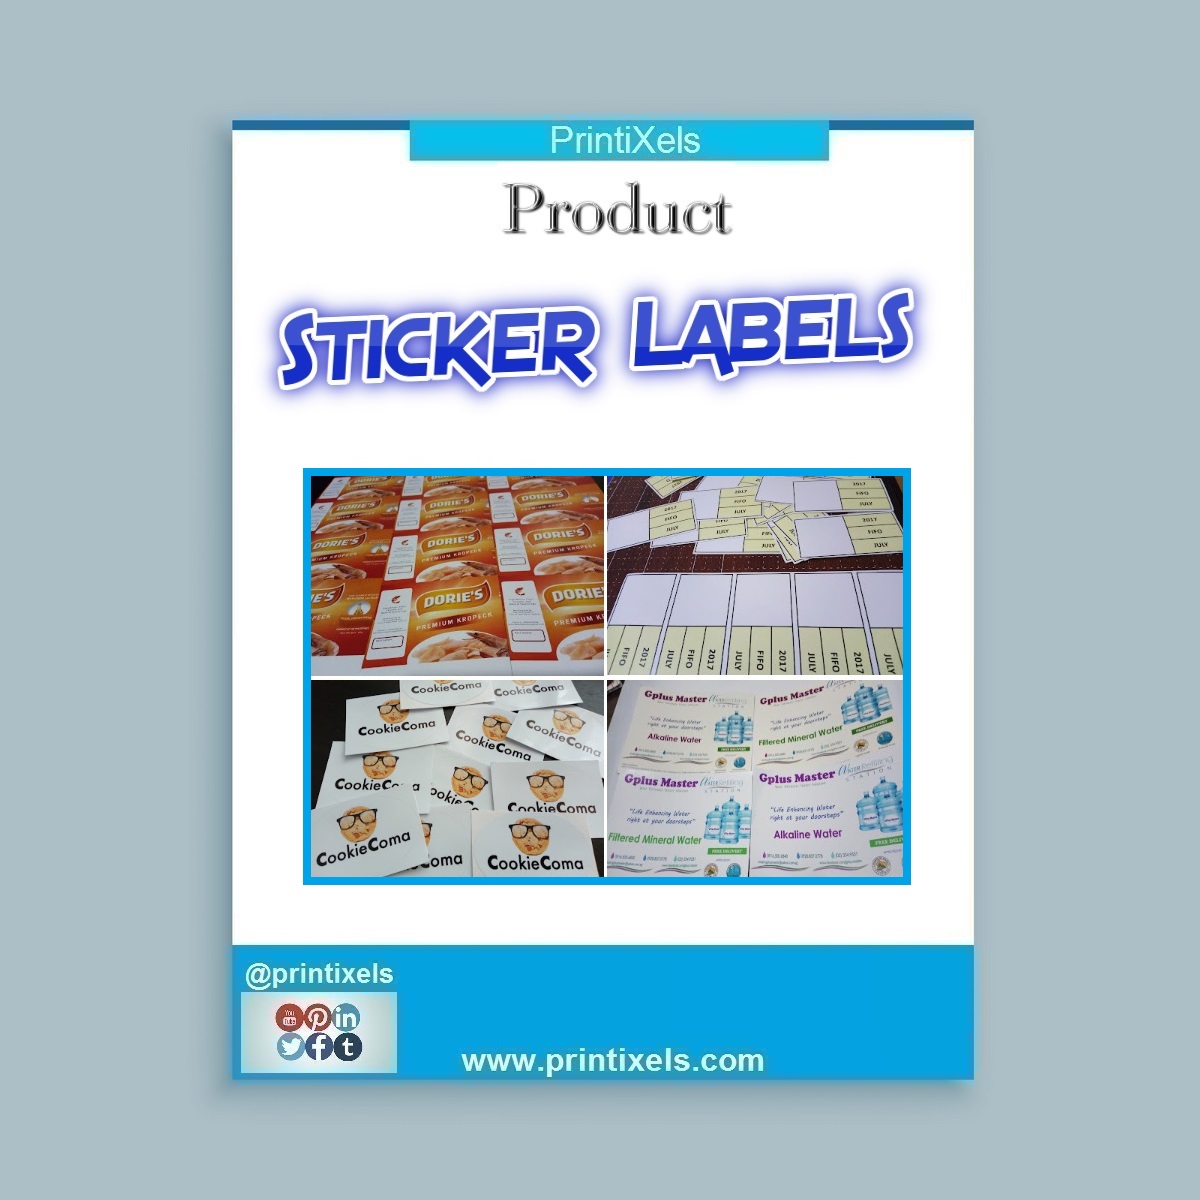 Product Sticker Labels Philippines